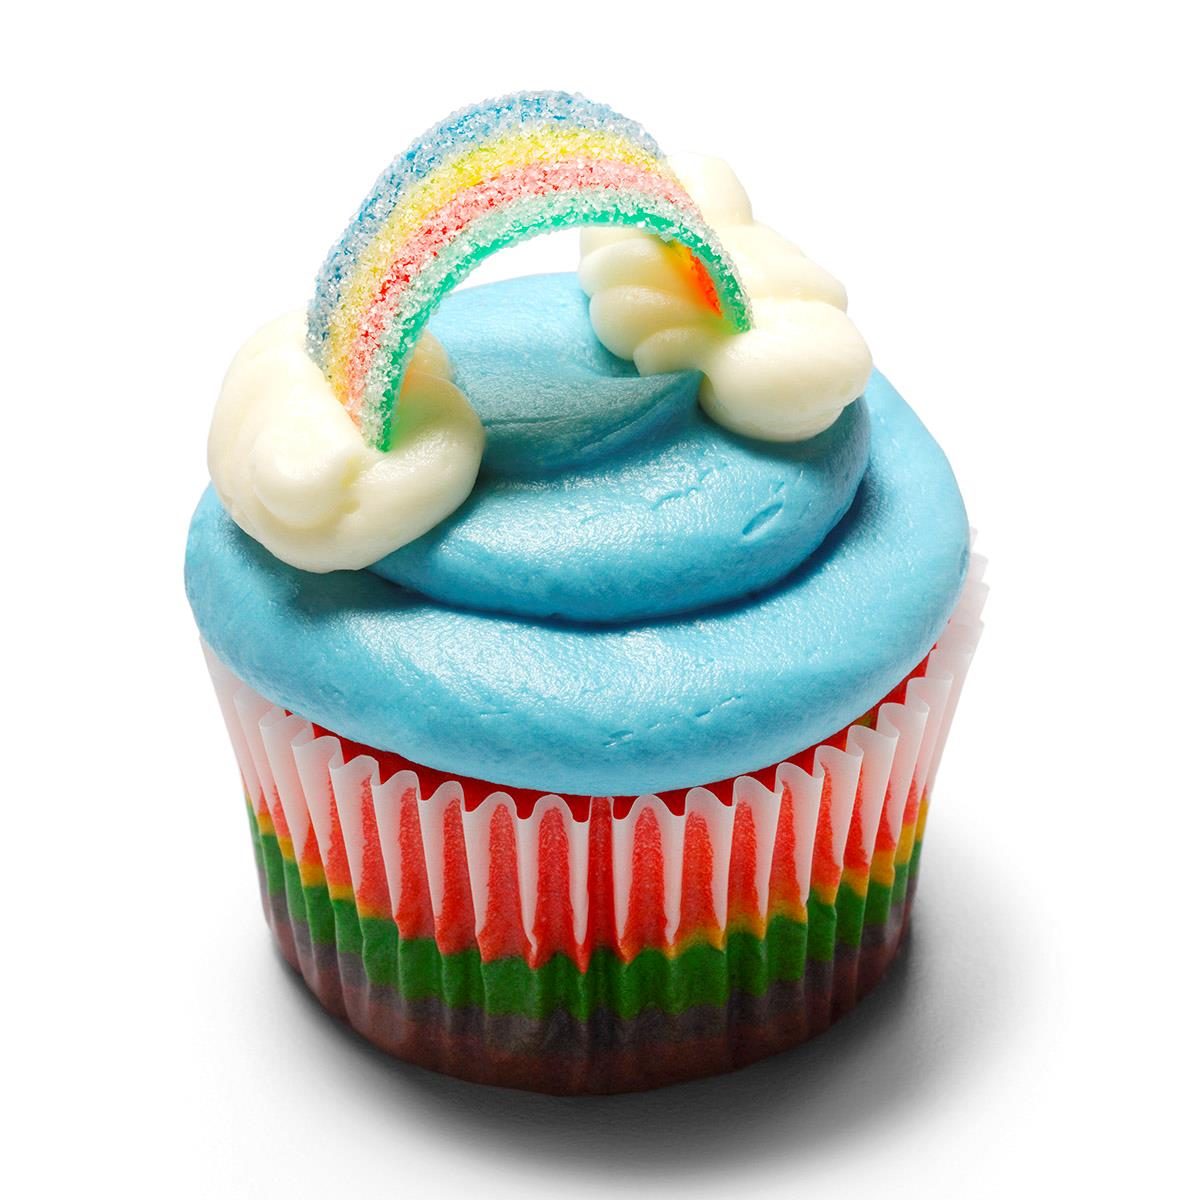 Tie-Dyed Cupcakes Recipe: How to Make It